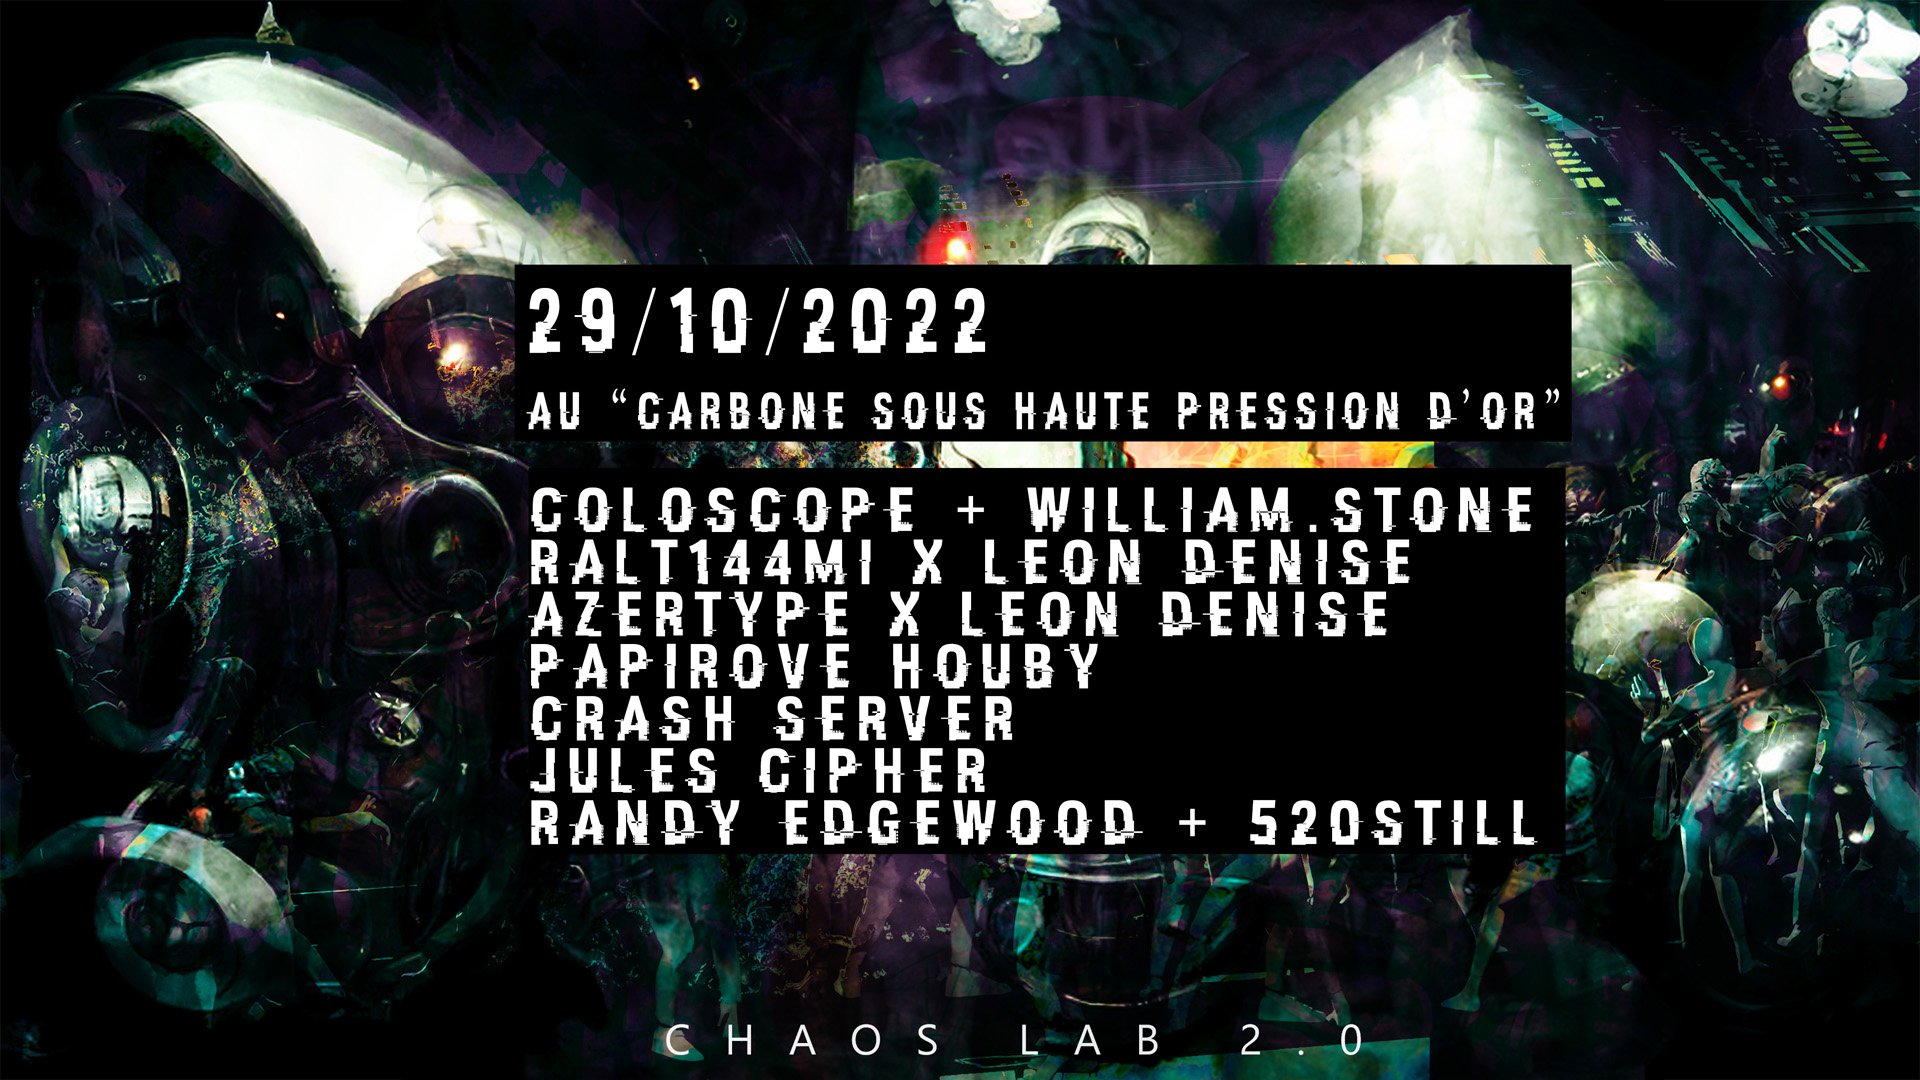 CHAOS LAB #2 – 29/10/2022 @ Diamant d’or